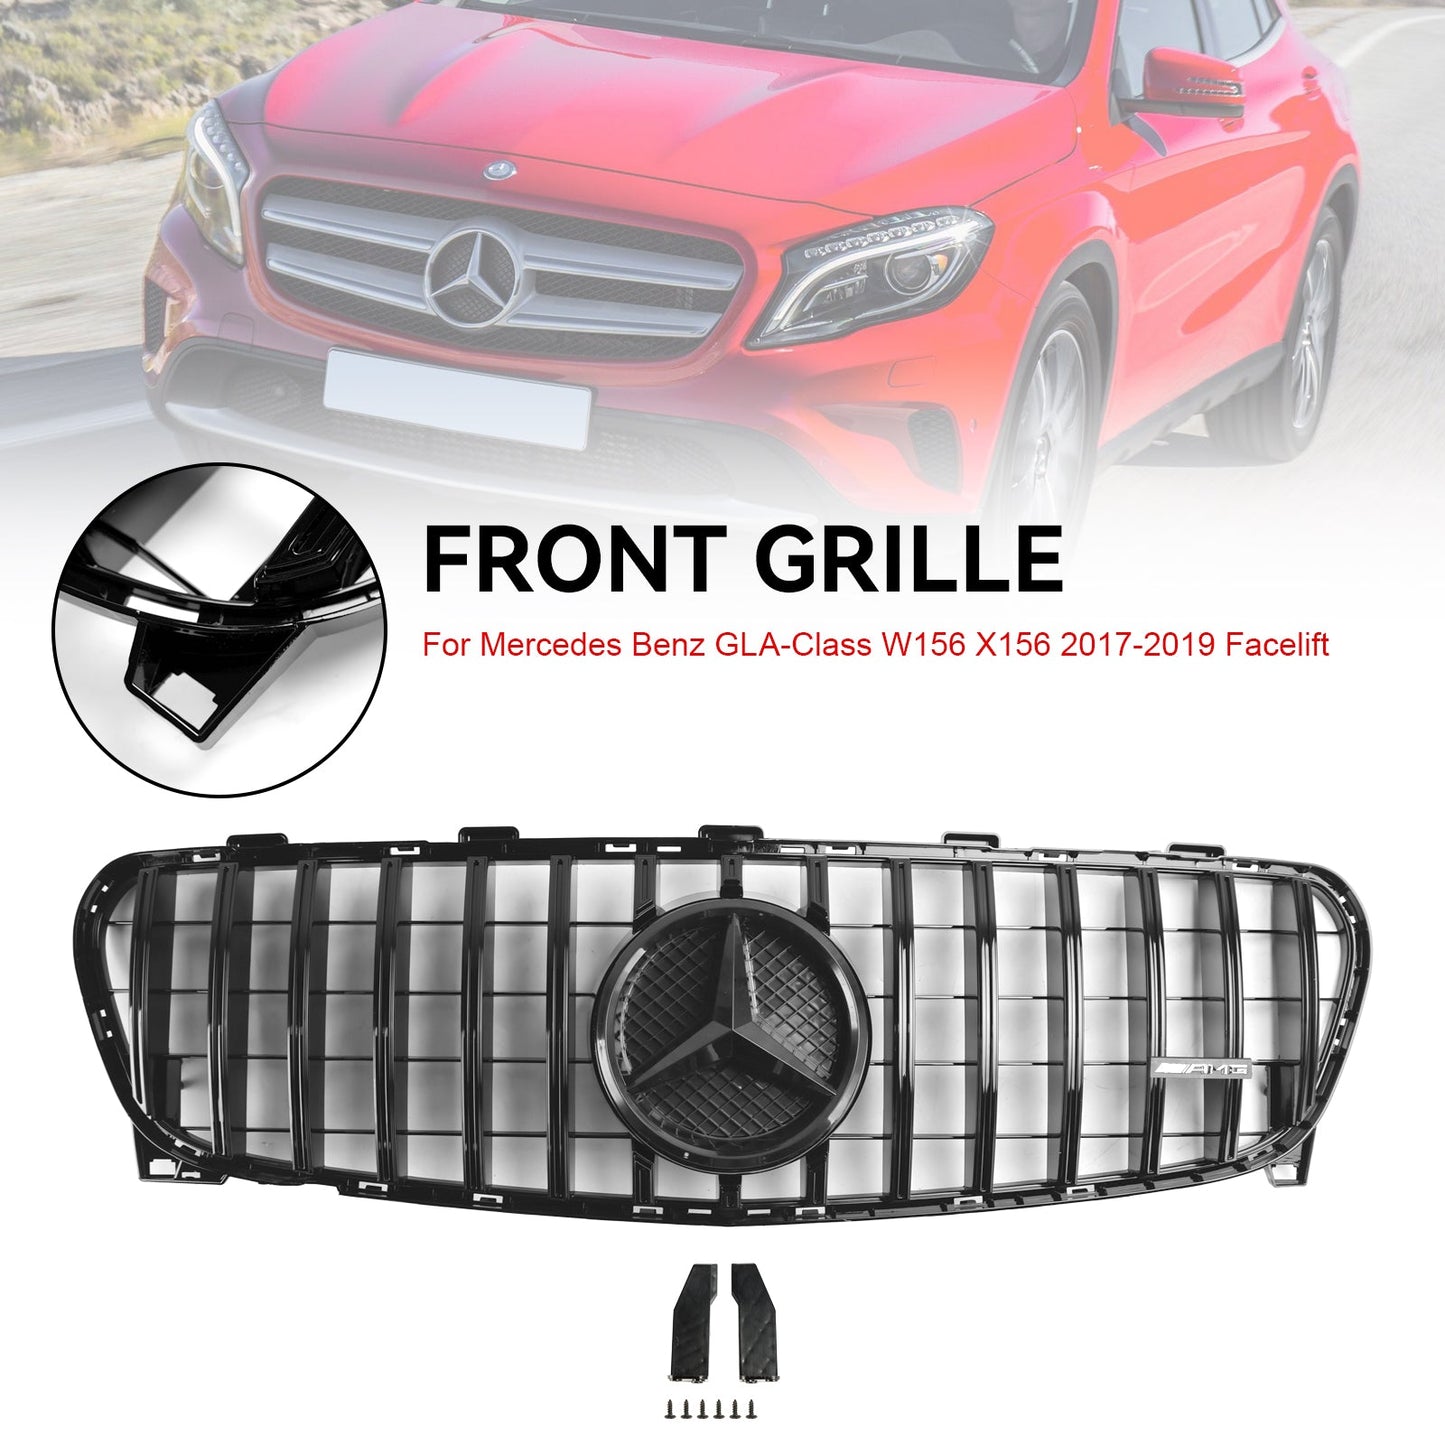 2017-2019 Mercedes Benz GLA W156 X156 Front Grill Grille Facelift Black